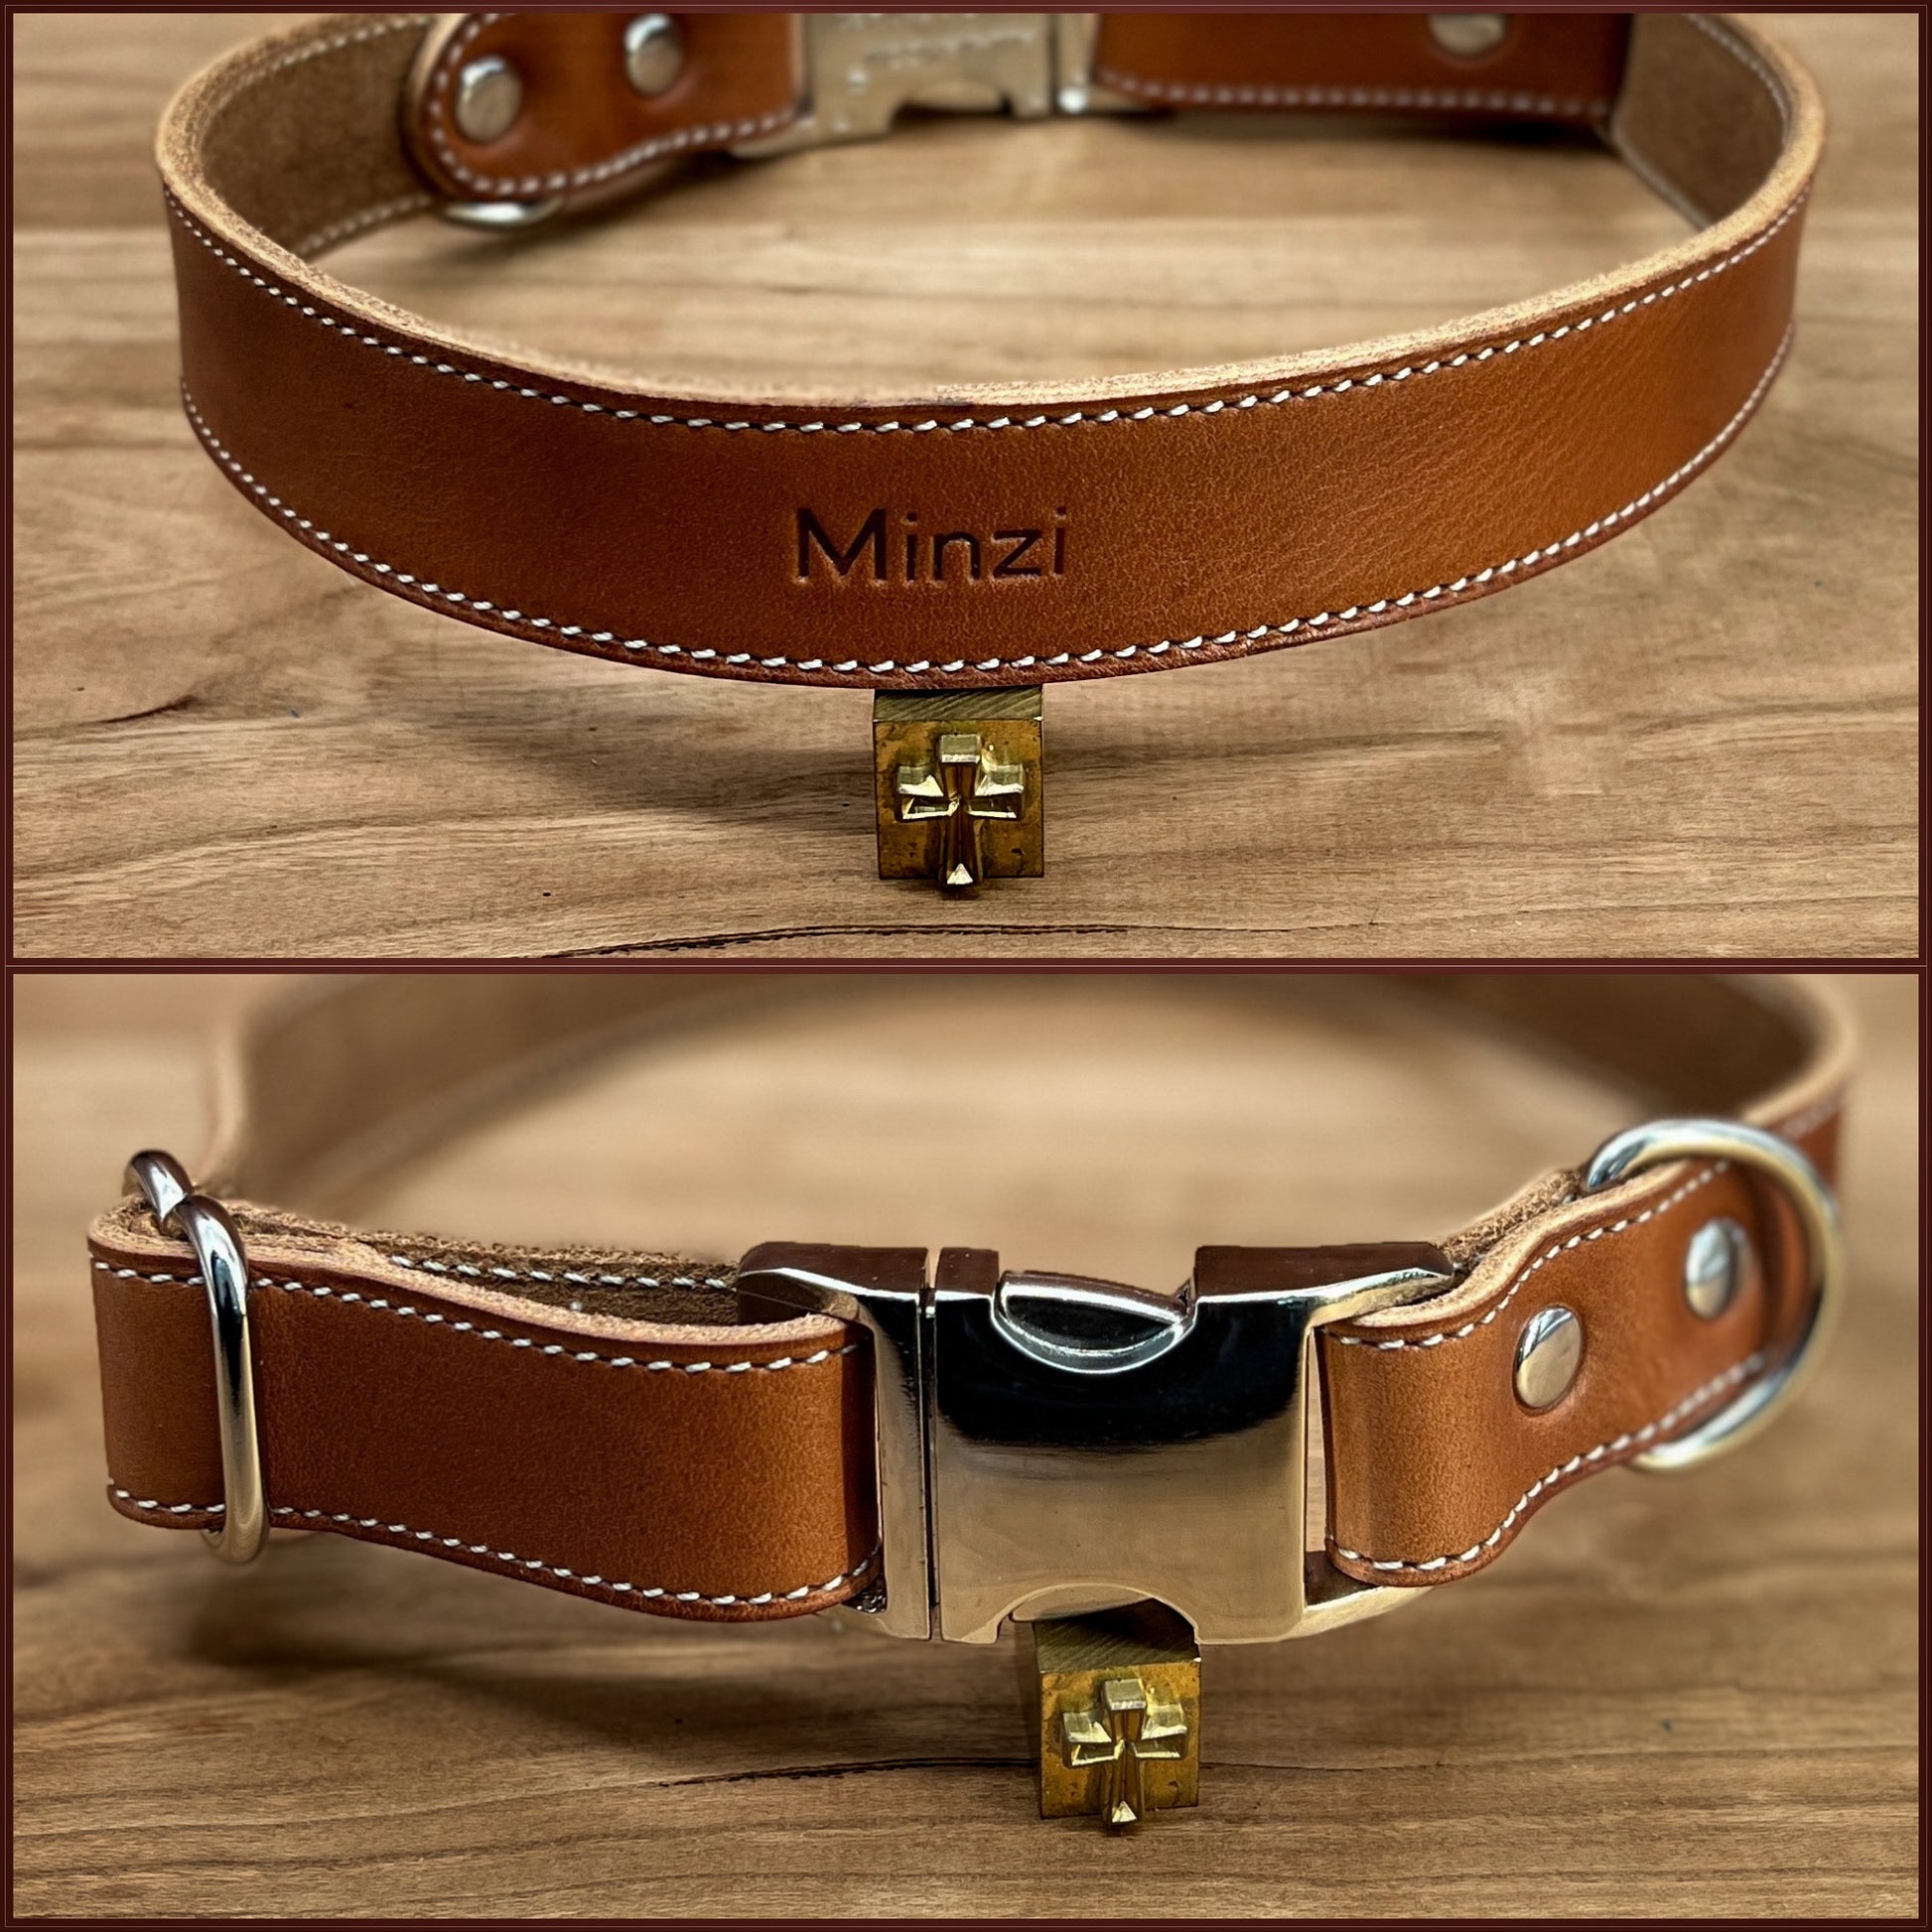 Emerald Green Dog Collar with Dark Brown Leather + Yellow and Tan Stitching